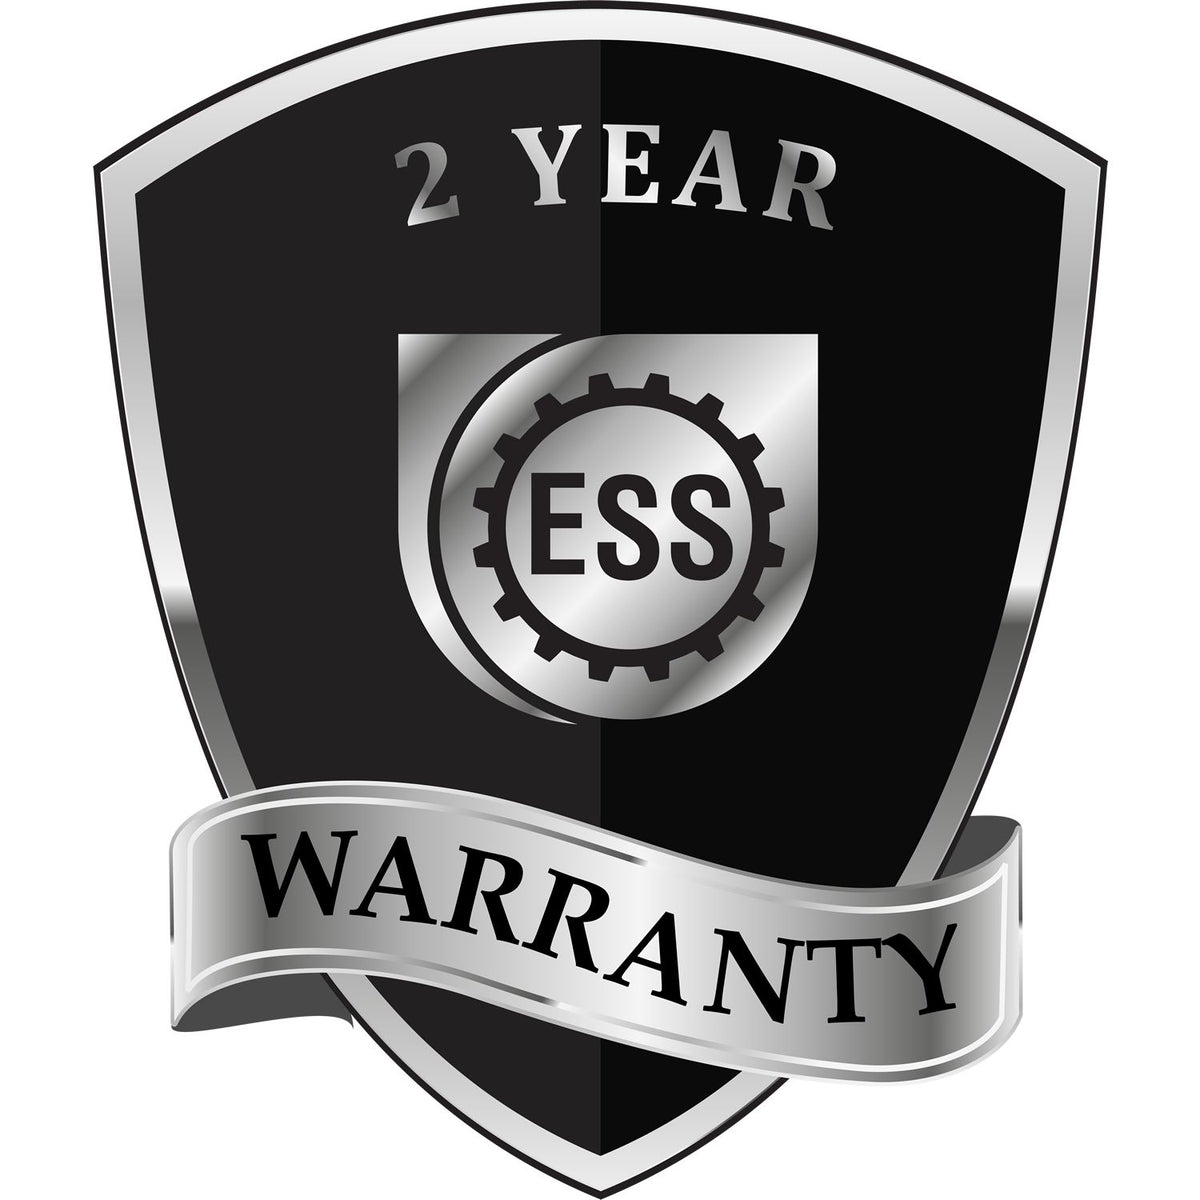 A black and silver badge or emblem showing warranty information for the Gift Kansas Geologist Seal